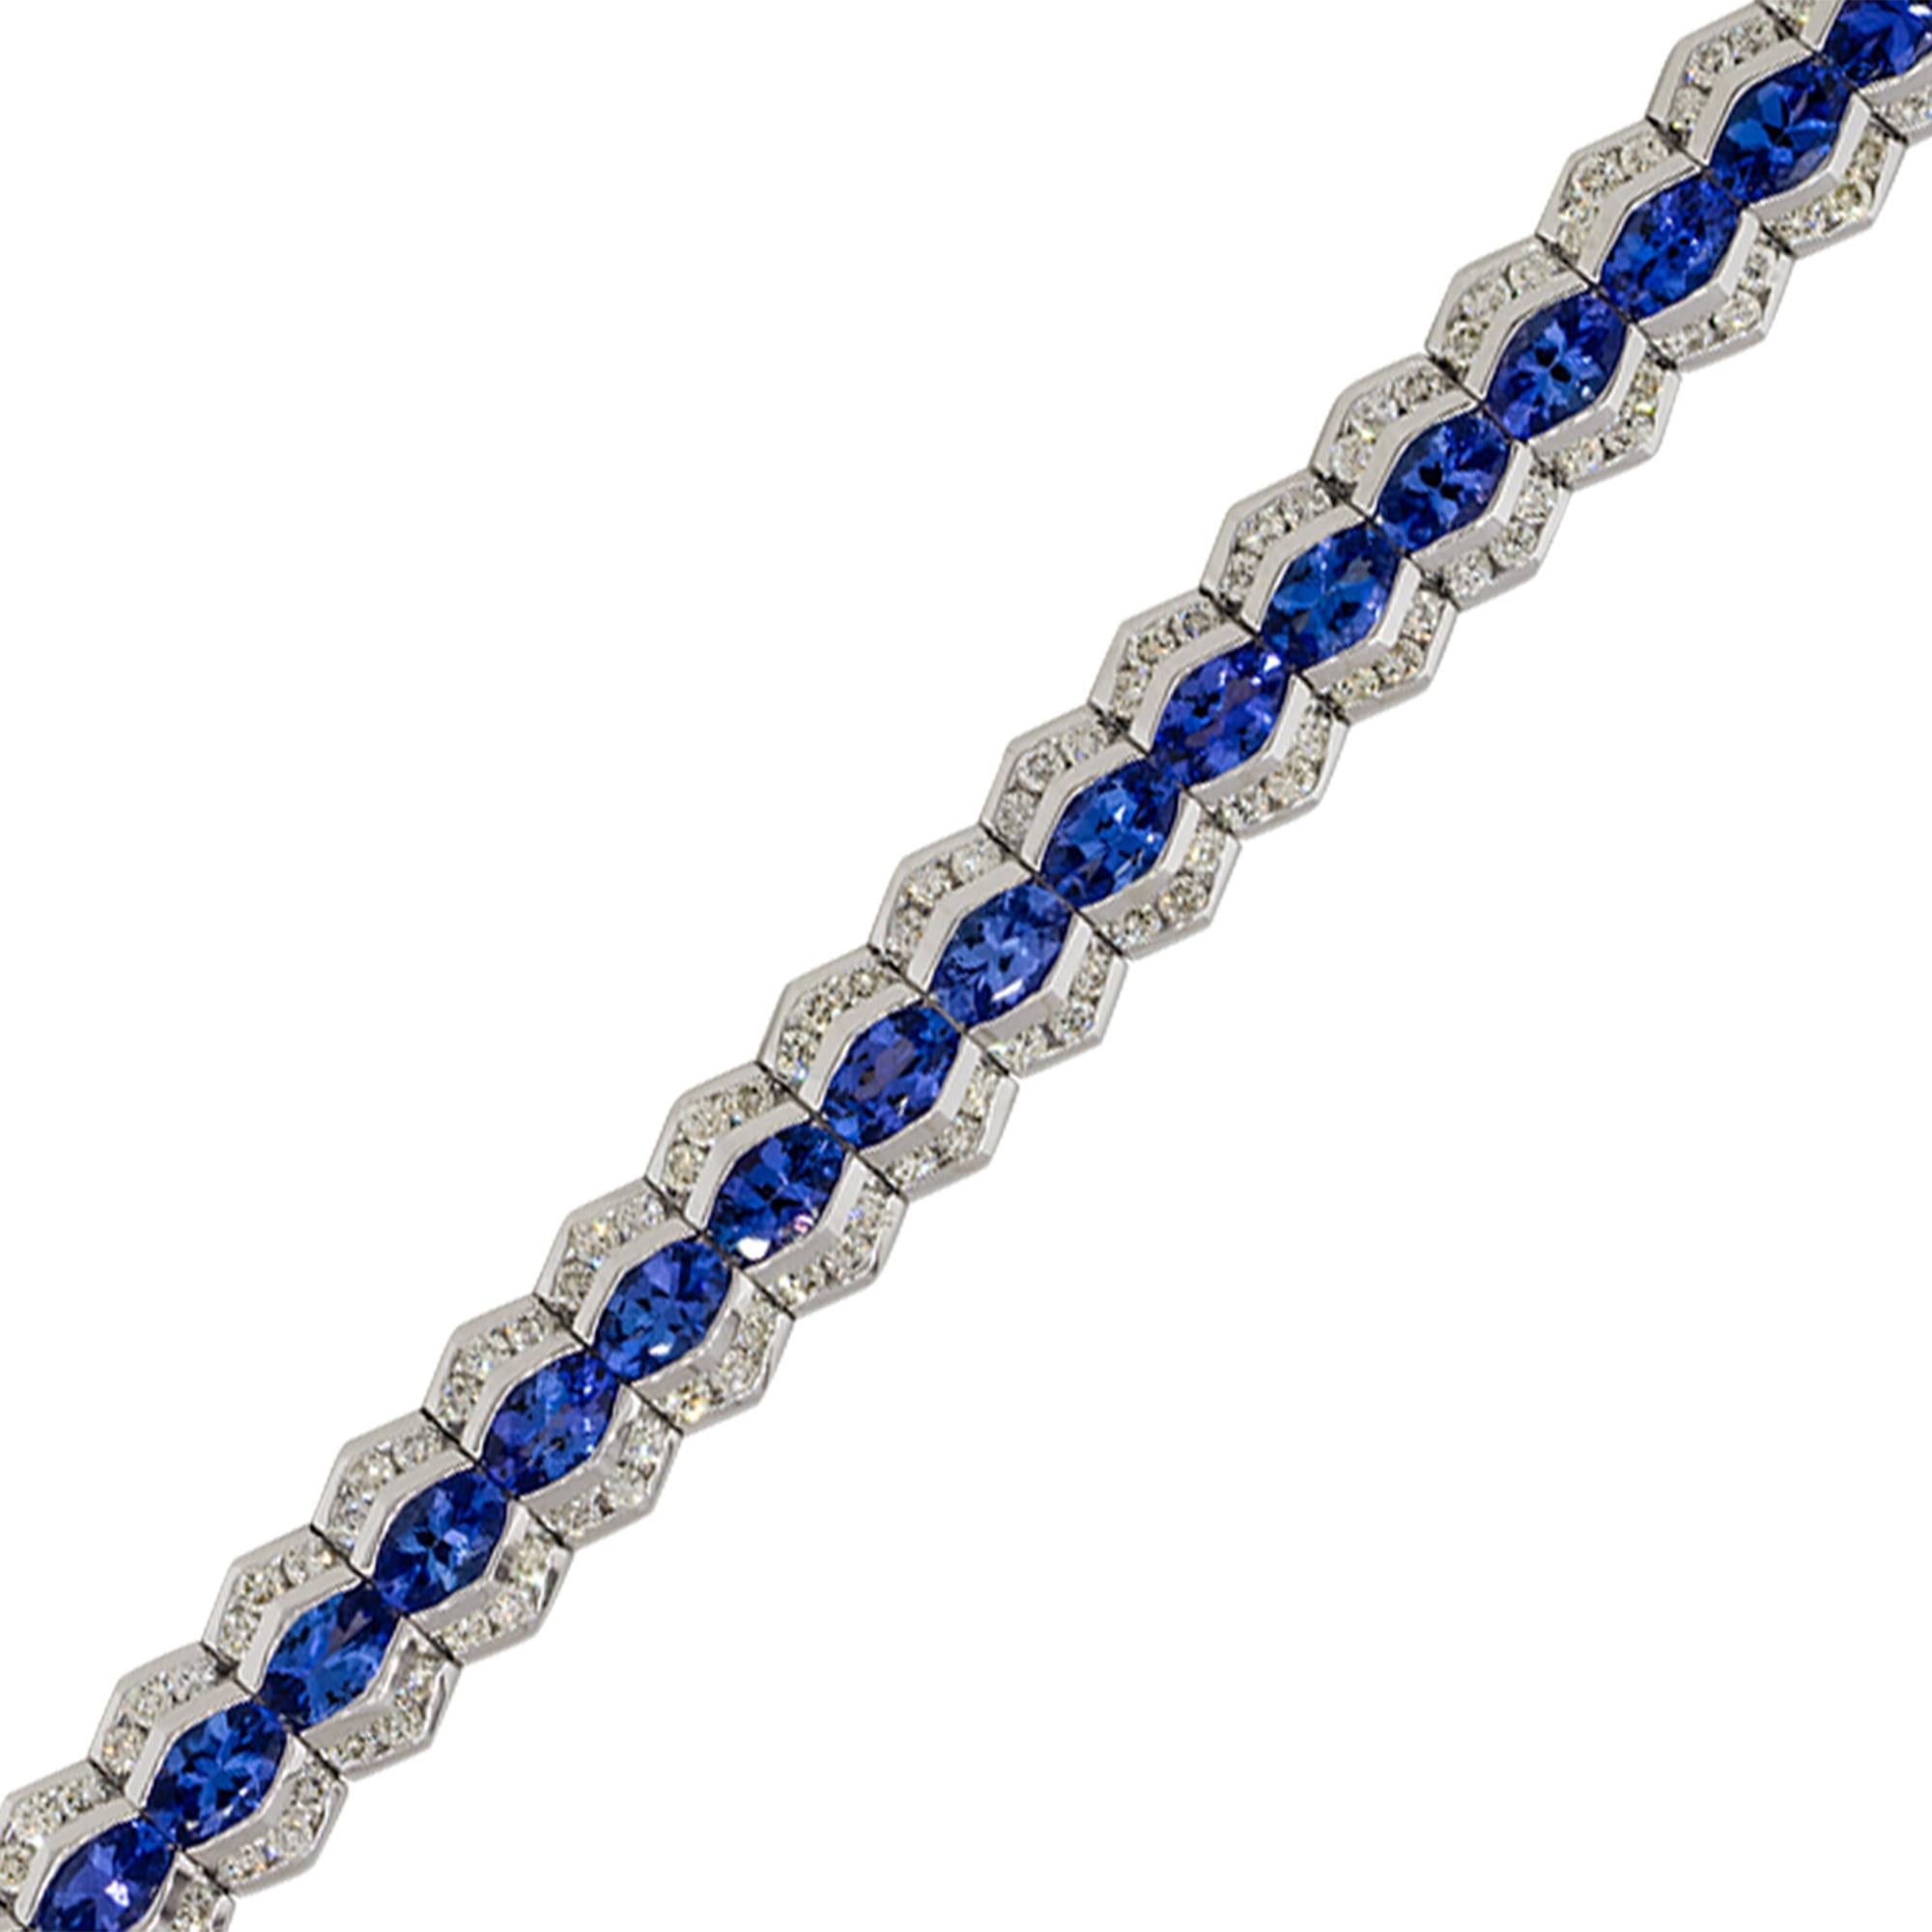 Material: 14k White Gold
Gemstone details: Approx. 13.20ctw of Tanzanite gemstones
Diamond details: Approx. 4.40ctw of round cut Diamonds. Diamonds are G/H in color and VS in clarity
Clasps: Tongue in box
Total Weight: 34.7g (22.3dwt) 
Bracelet